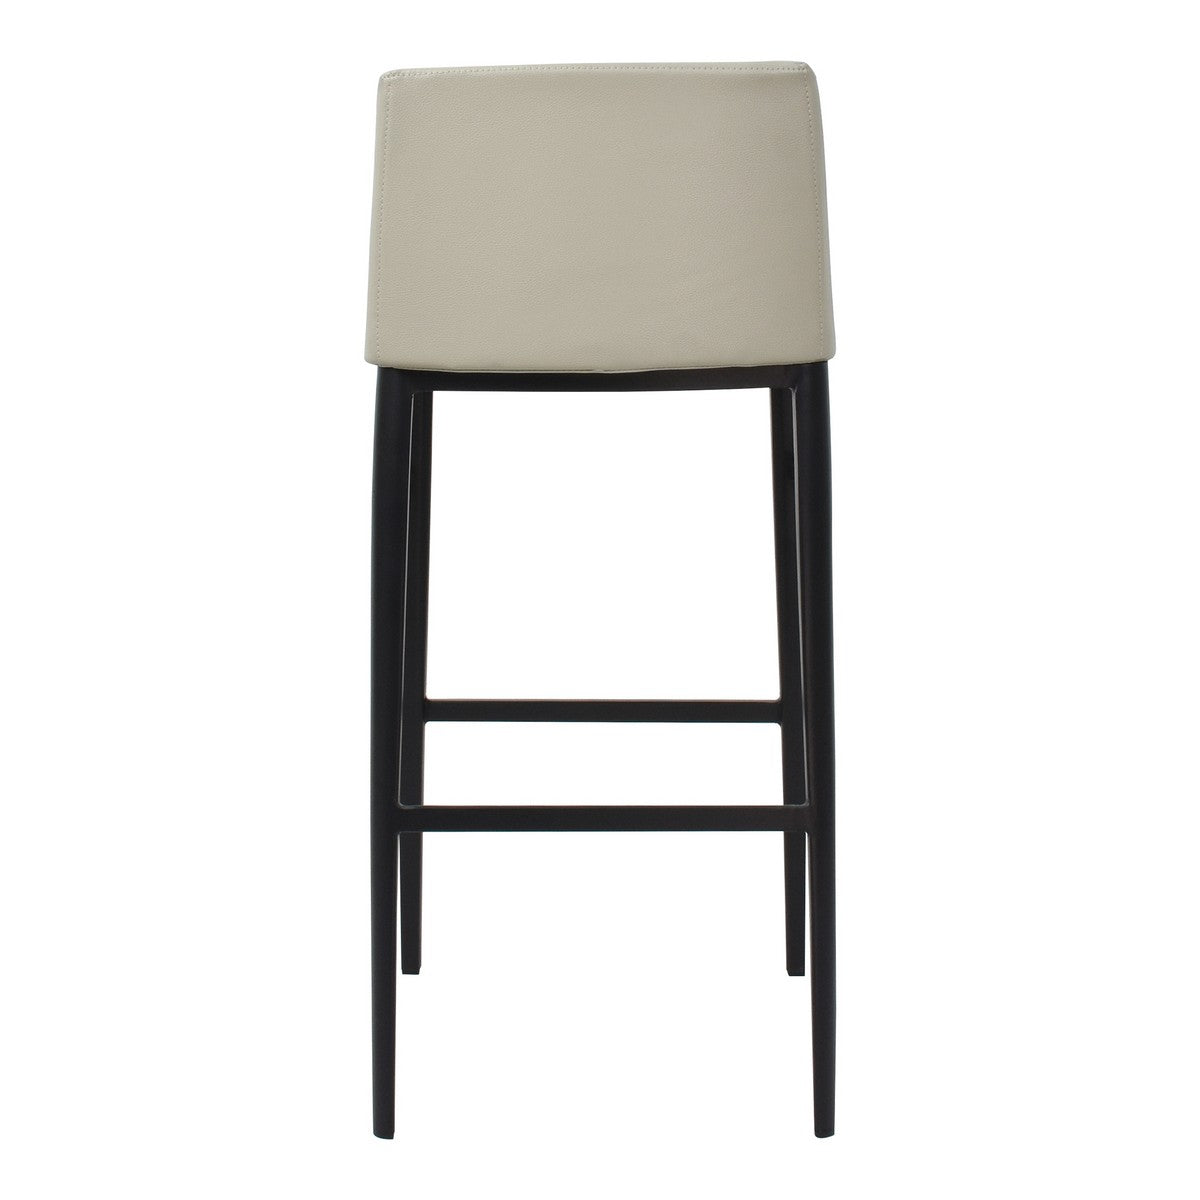 Moe's Home Collection Baron Barstool Beige - EJ-1032-34